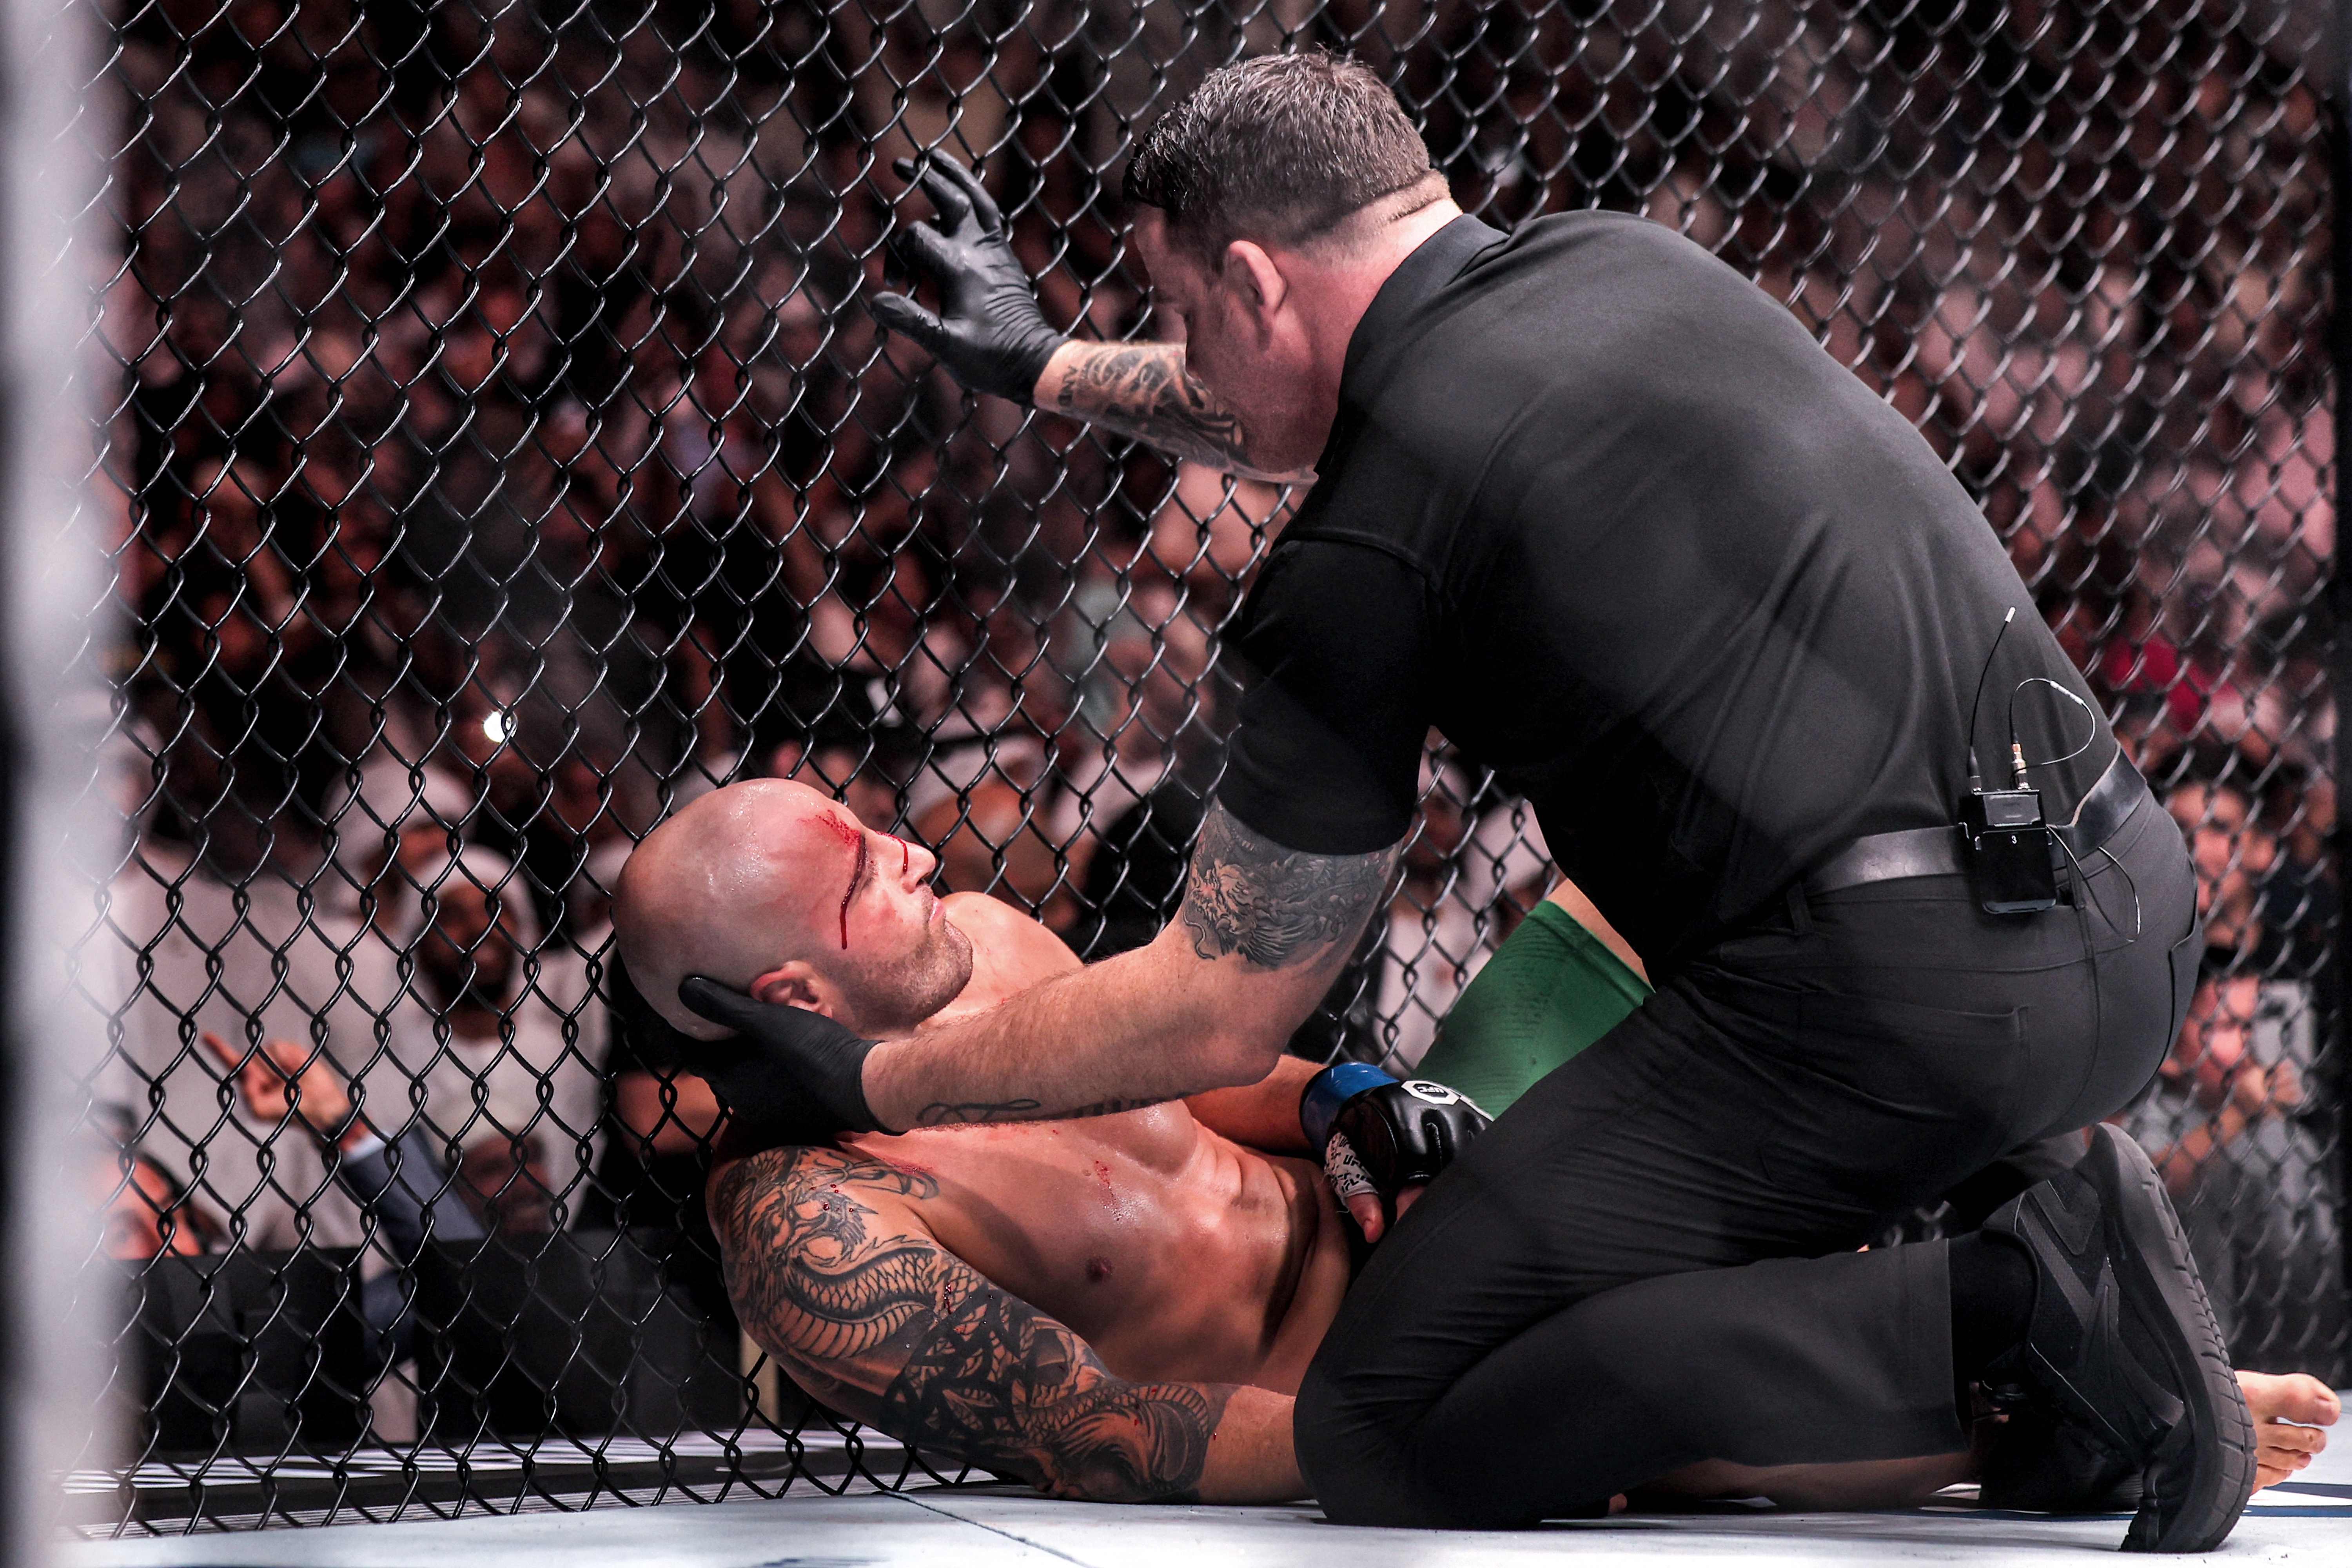 Volkanovski was left bloodied by the fight-ending sequence